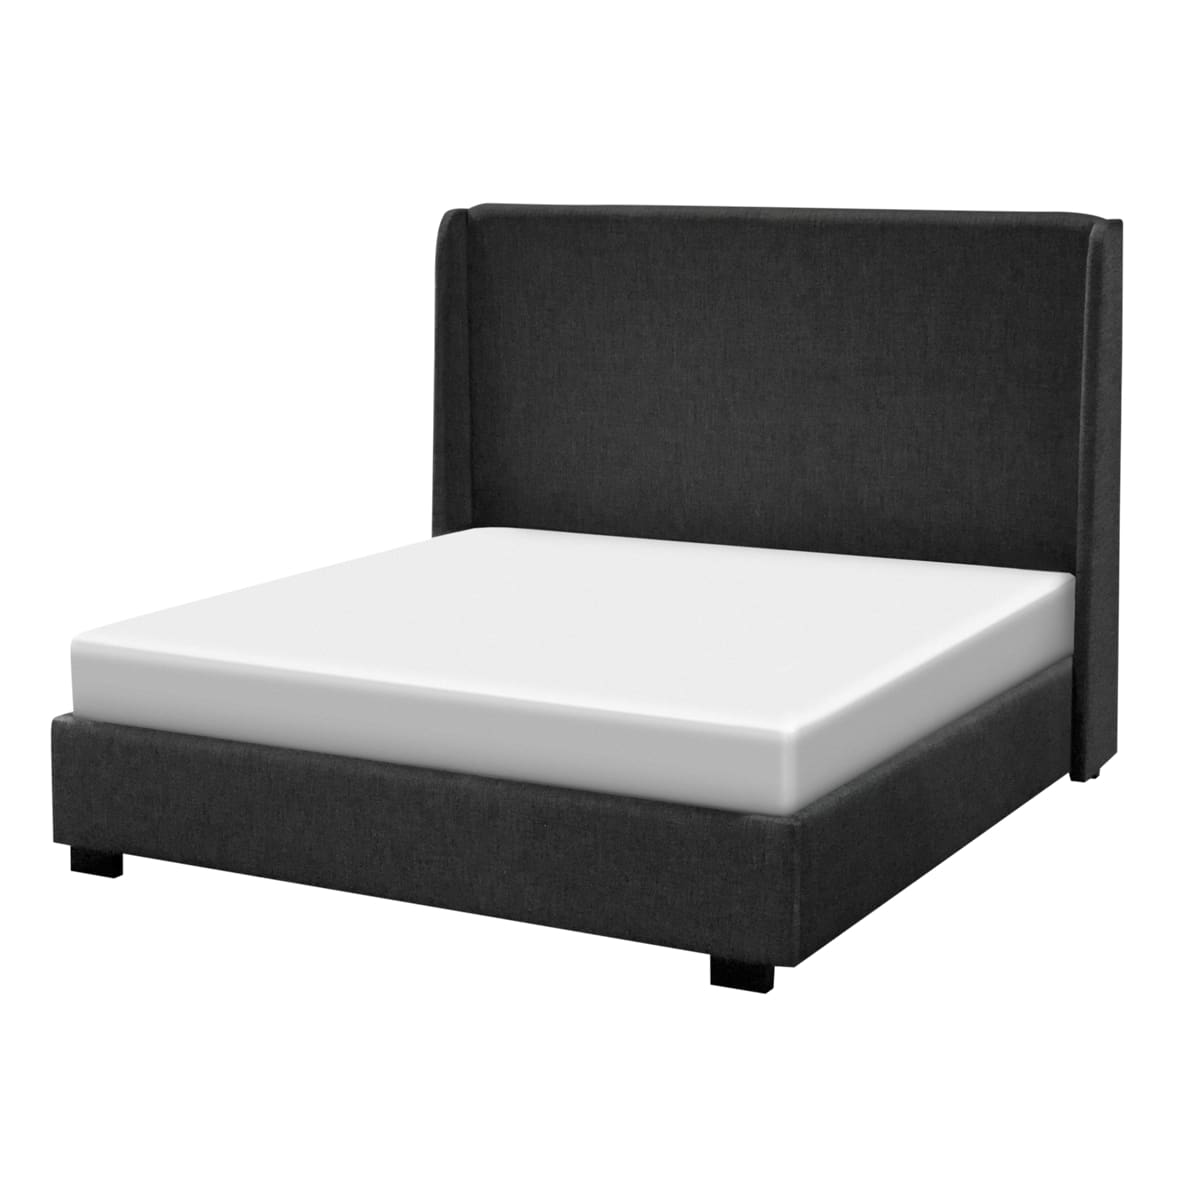 Abby Upholstery Bed - $1699.99 - BED